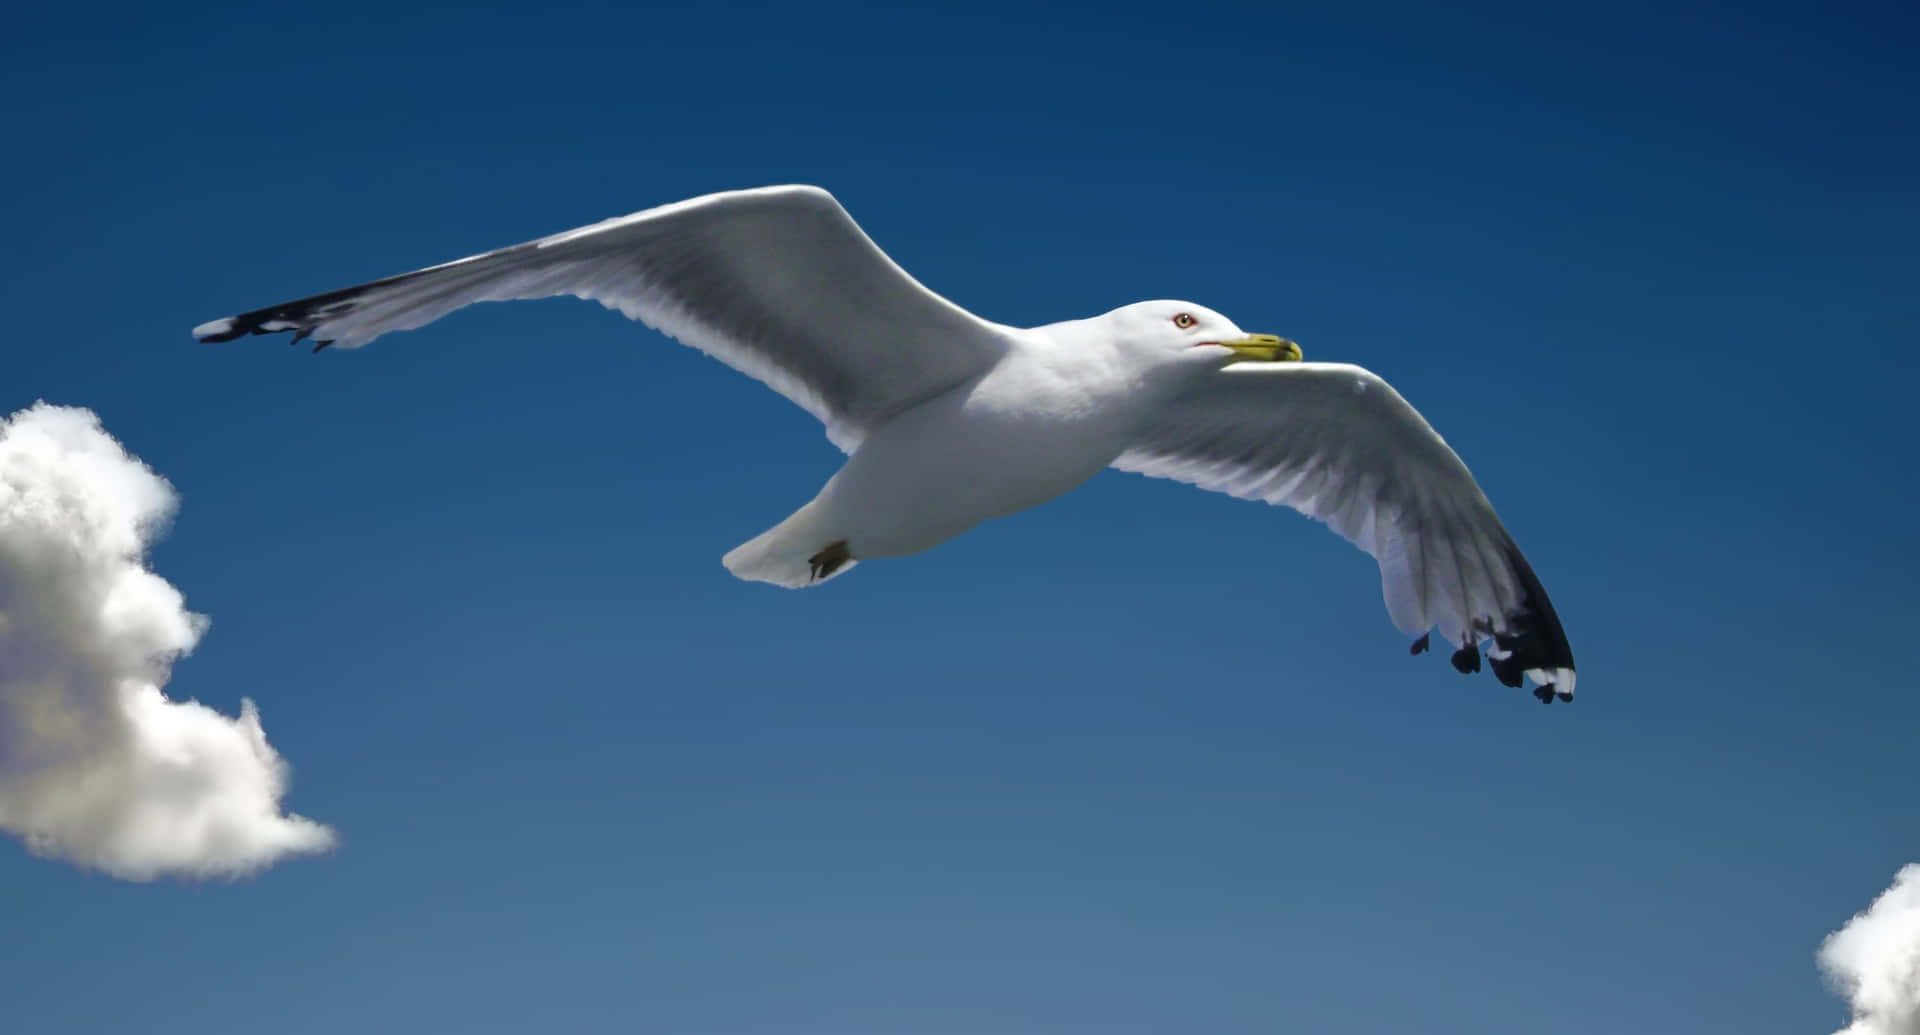 Majestic Seagull Soaring Over The Ocean